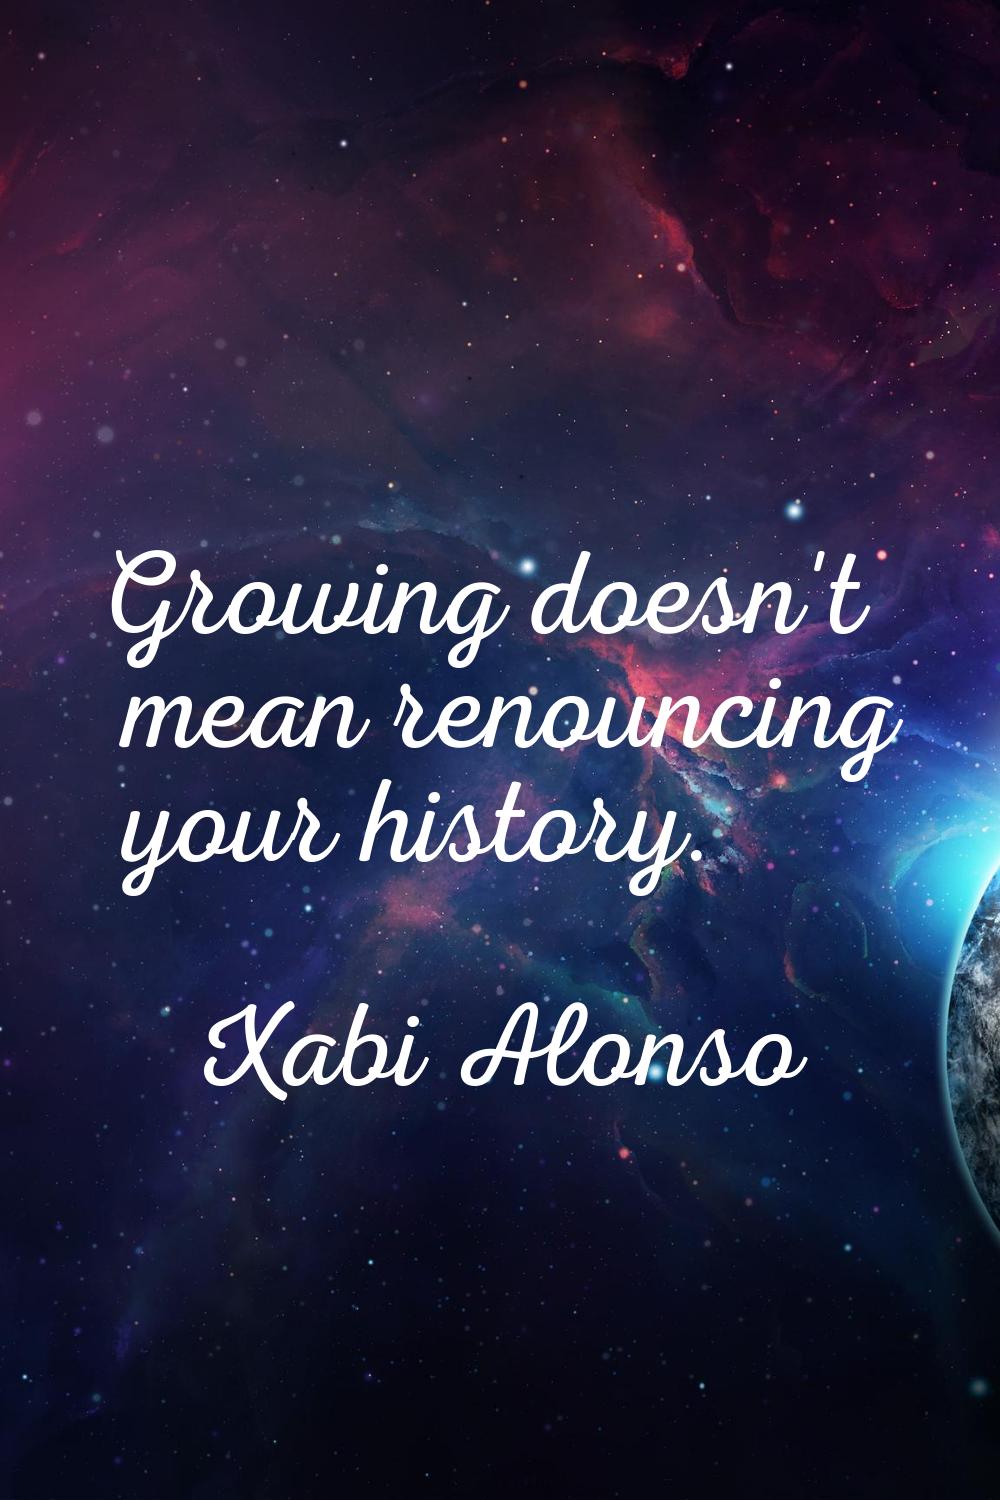 Growing doesn't mean renouncing your history.